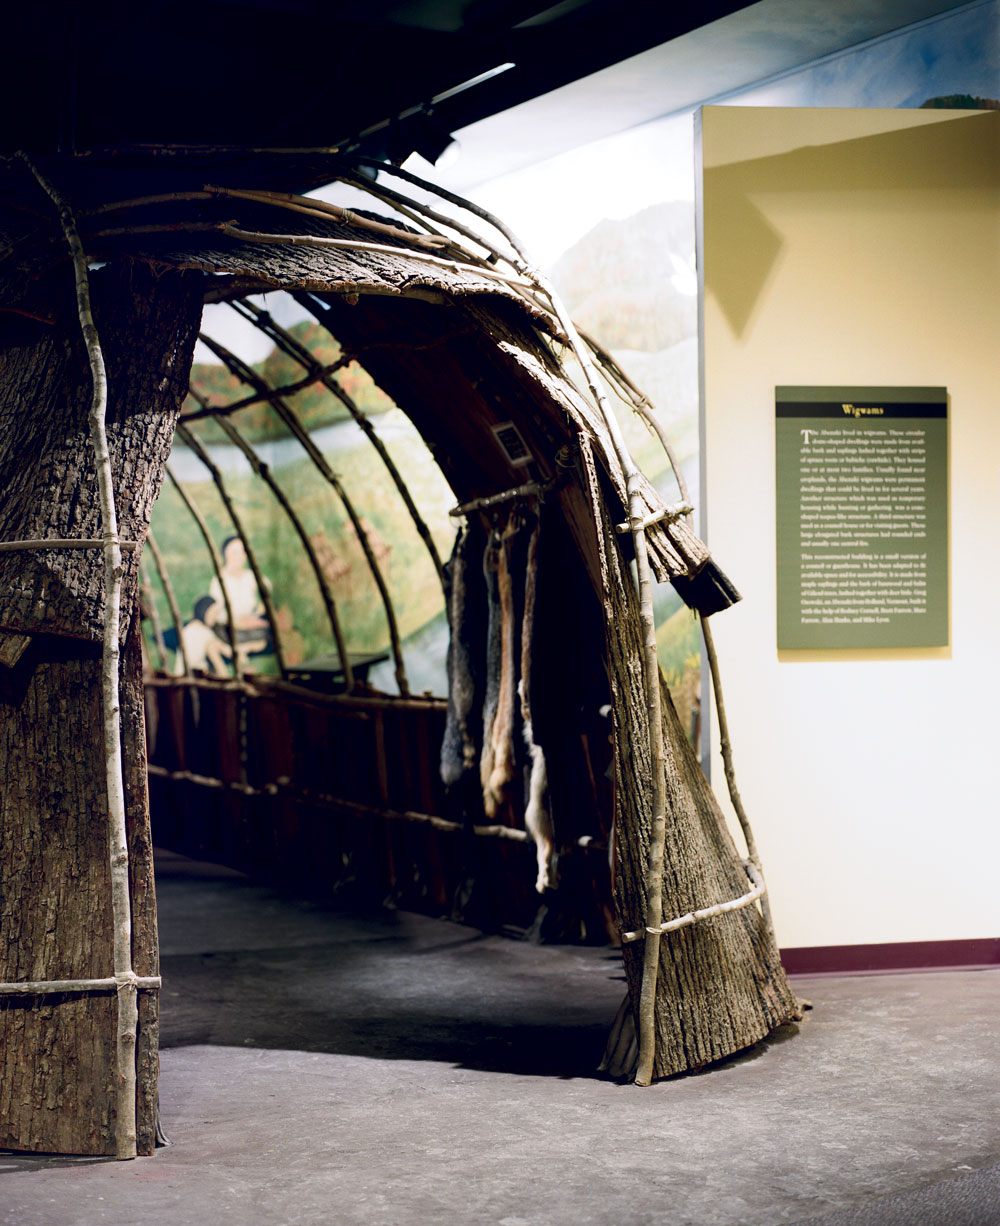 This reconstructed Abenaki wigwam, built of maple saplings, basswood bark, and deer hide, is one element in the Vermont History Museum’s multimedia Freedom and Unity: One Ideal, Many Stories exhibit.